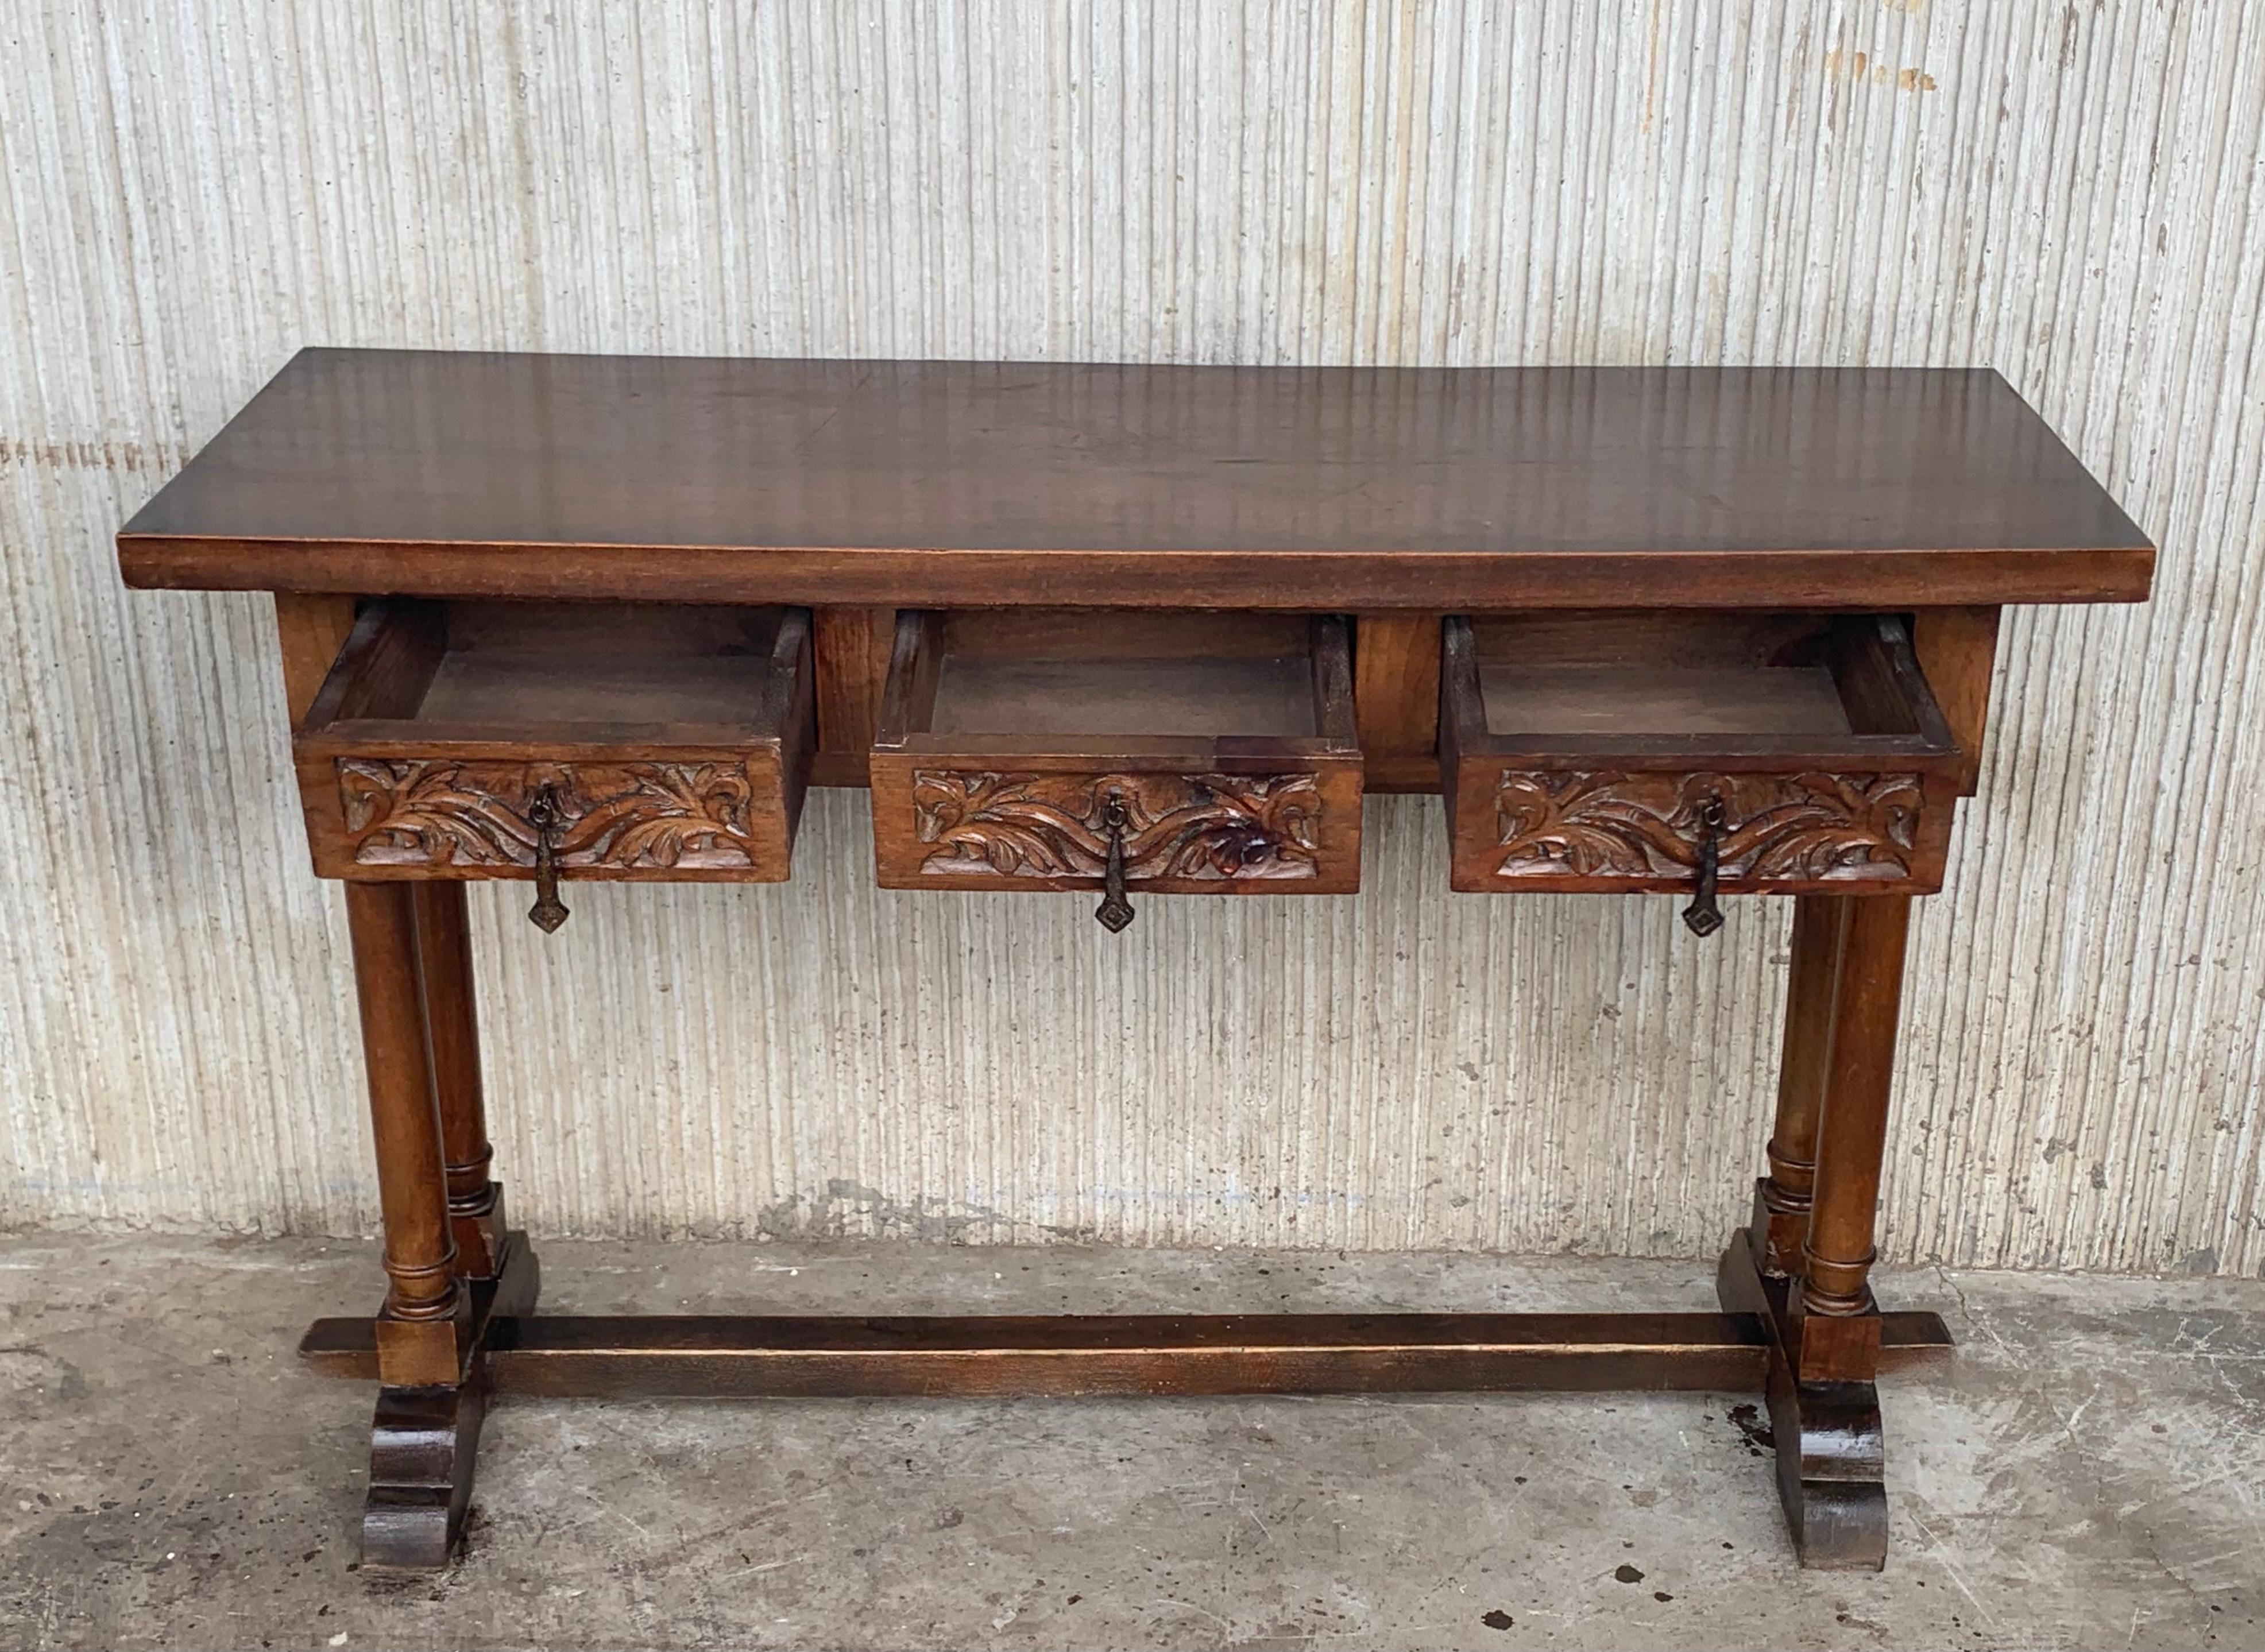 Late 19th Century Baroque Console Table in Walnut with Three Carved Drawers and Stretcher